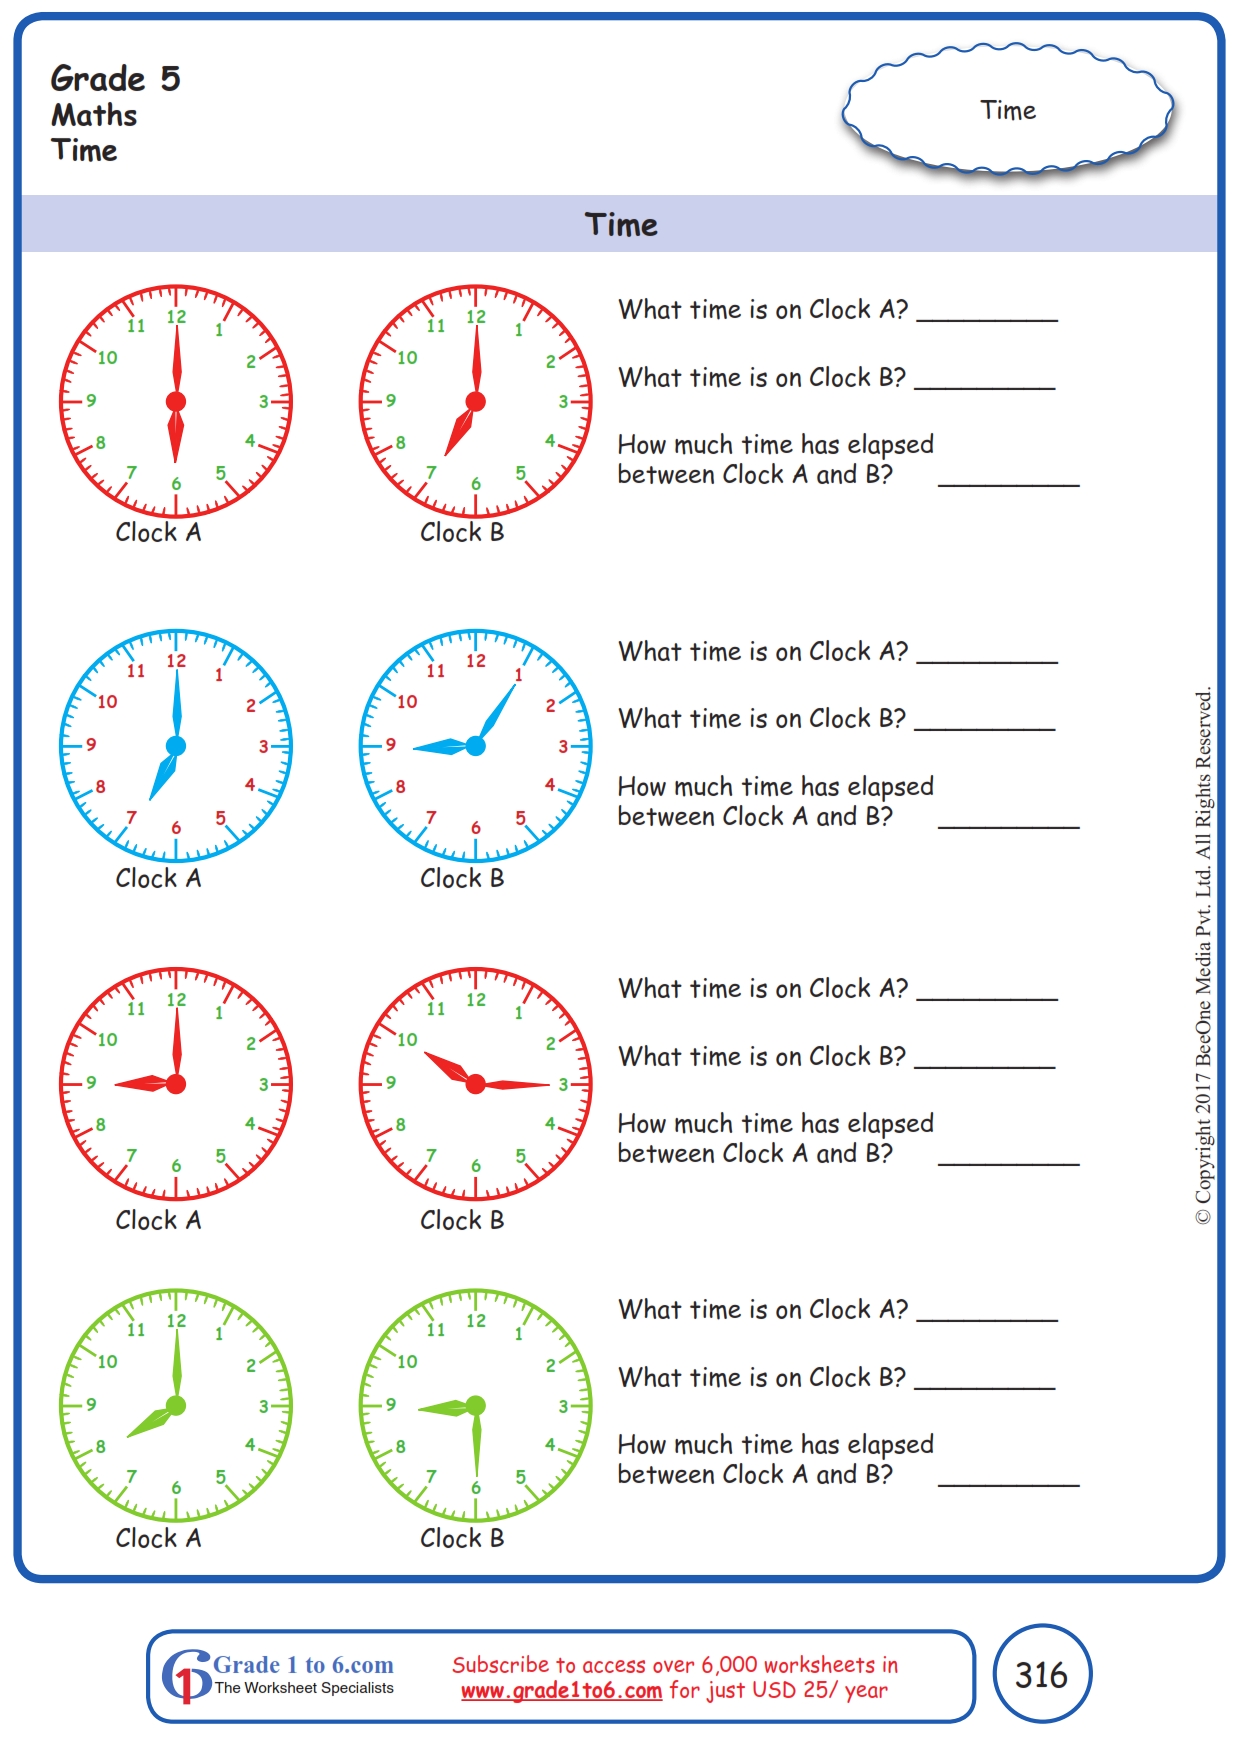 telling-time-worksheets-grade-5-www-grade1to6